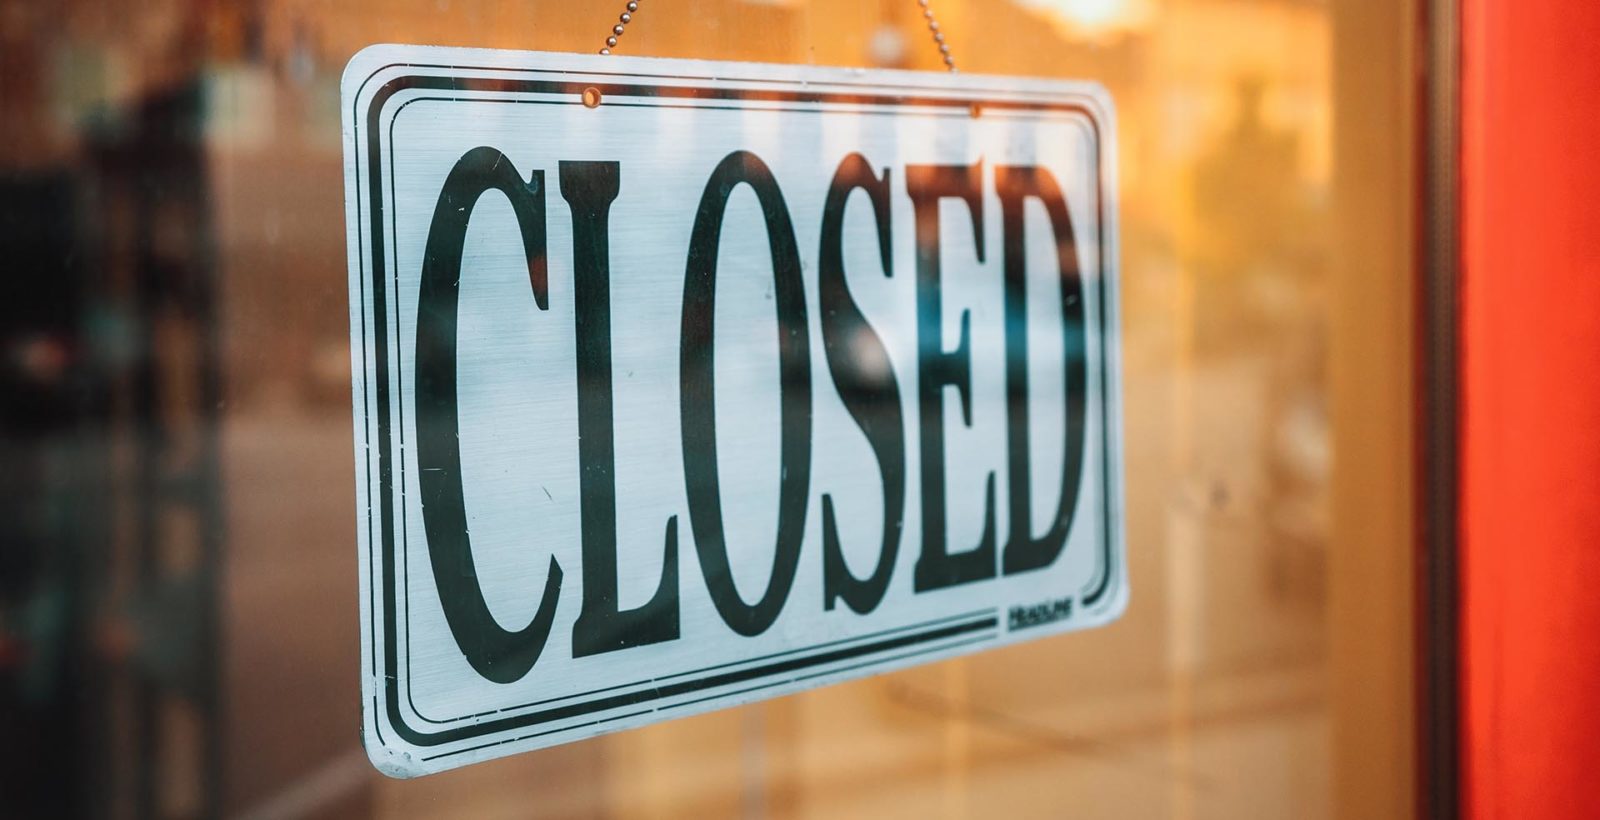 "Closed" sign on a business storefront